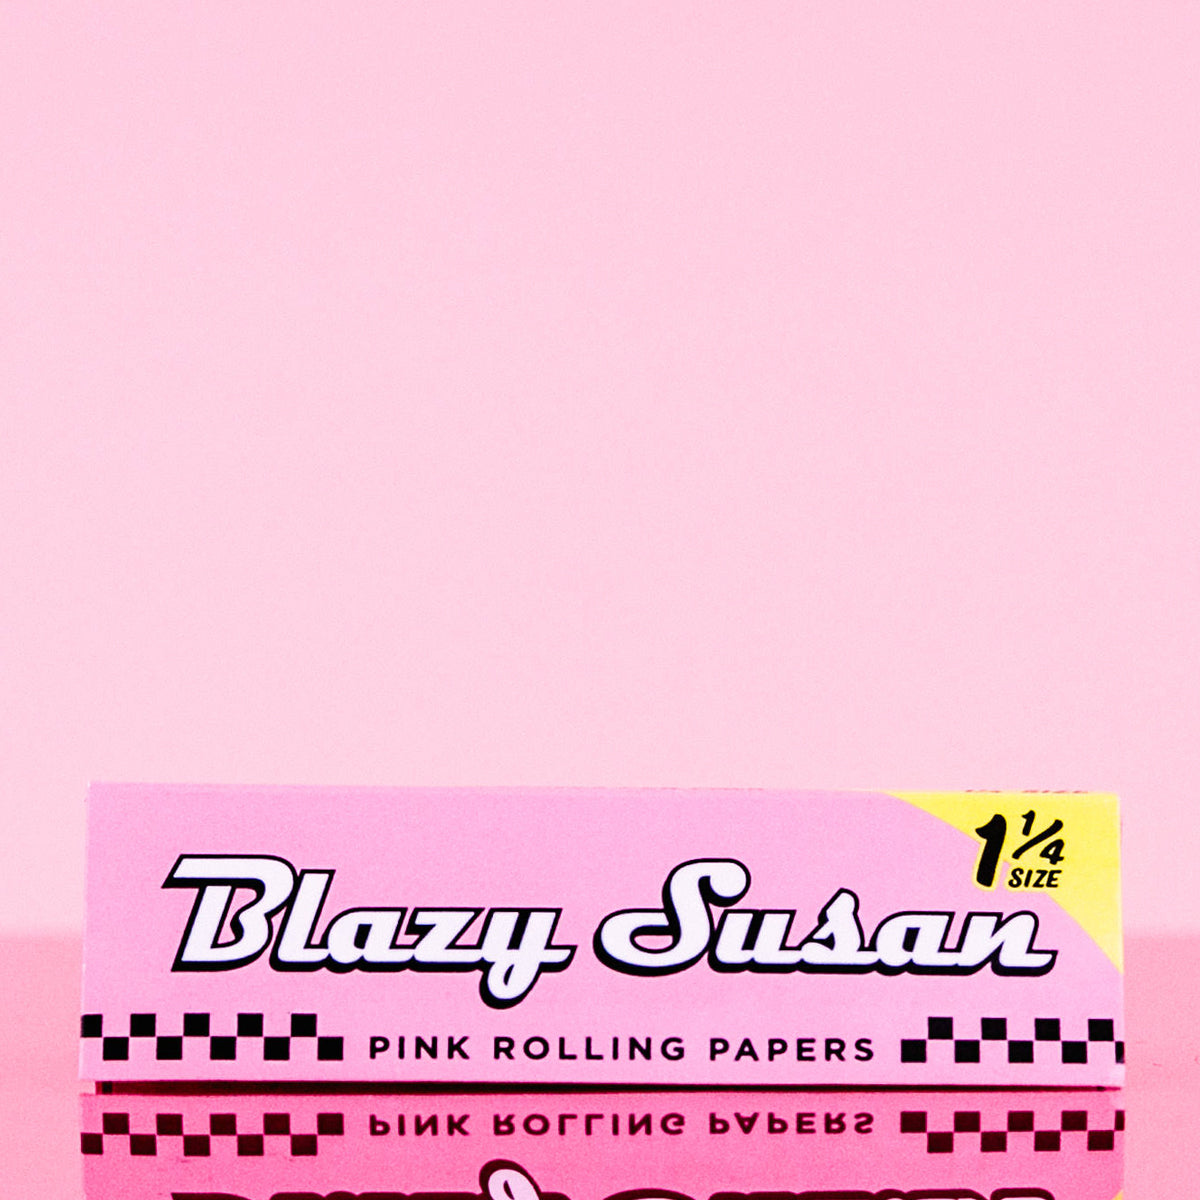 Blazy Susan Pink Rolling Papers 1 1/4 - 50 Pack